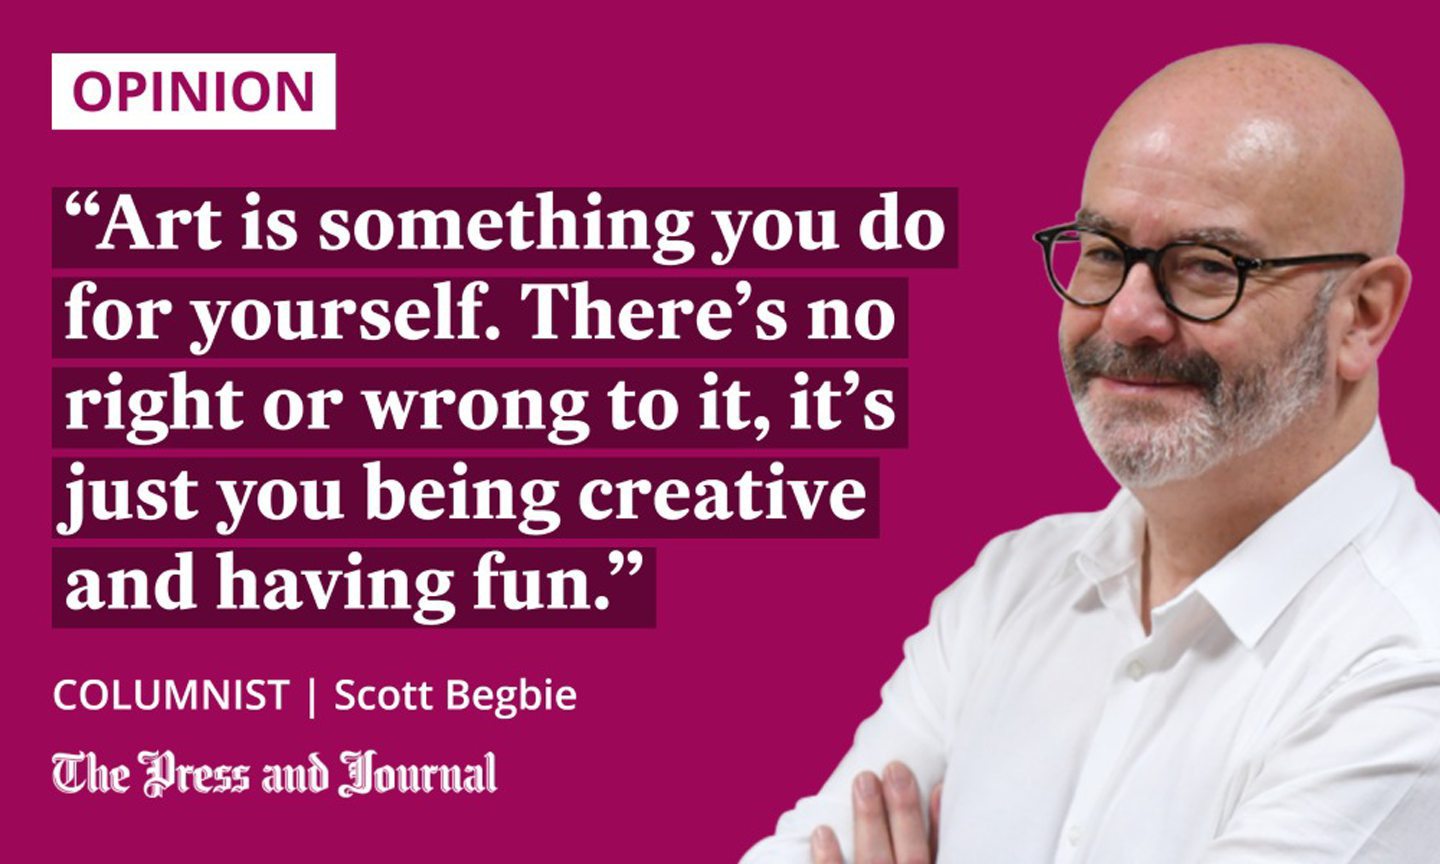 Columnist, Scott Begbie on Nuart: "Art is something you do for yourself. There’s no right or wrong to it, it’s just you being creative and having fun."